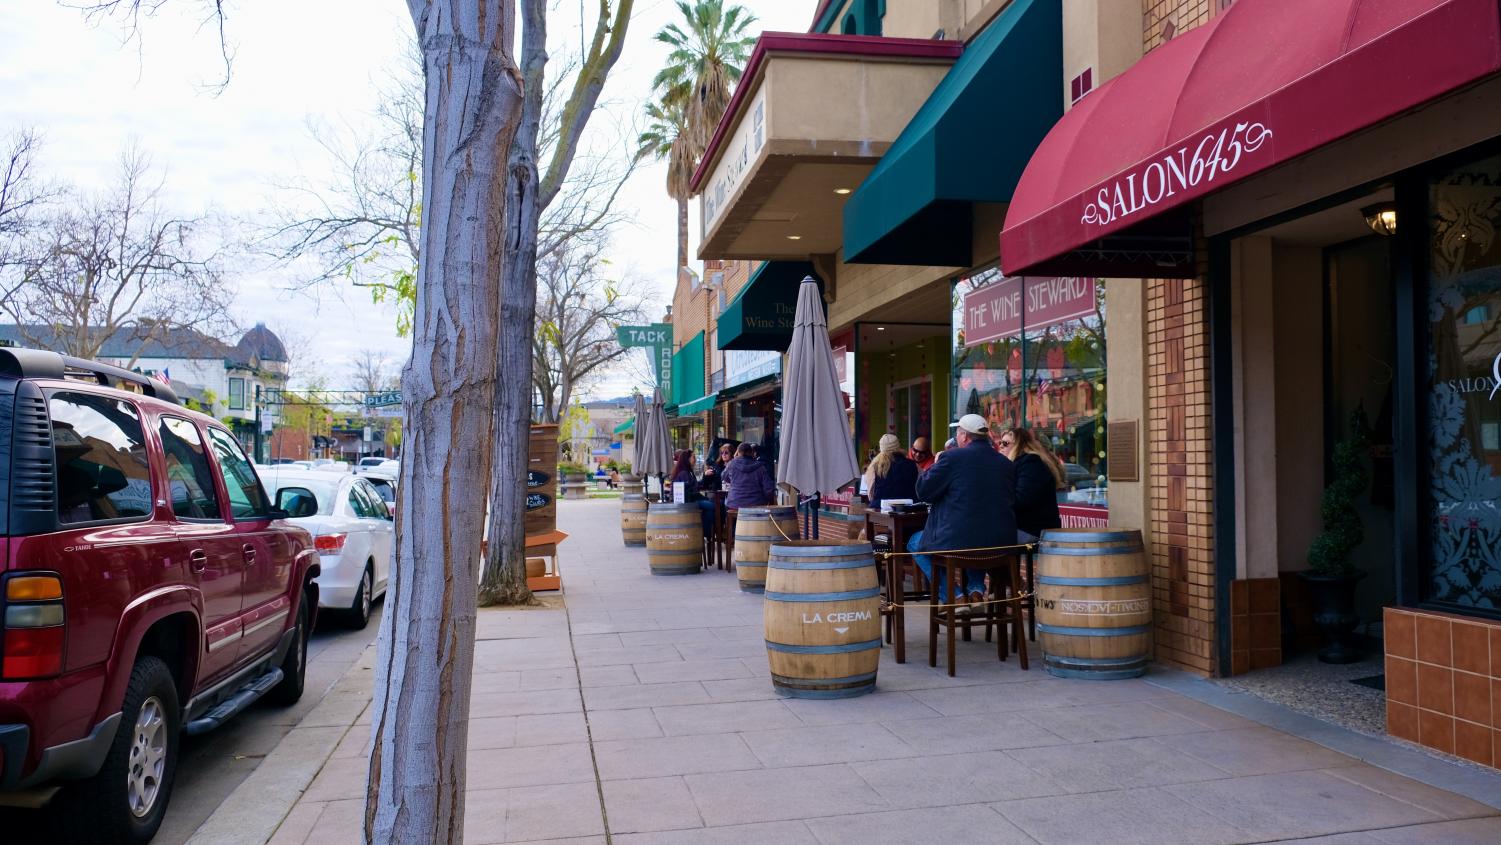 March+2021%3A+Downtown+Pleasanton+slowly+opens+back+up+to+the+public